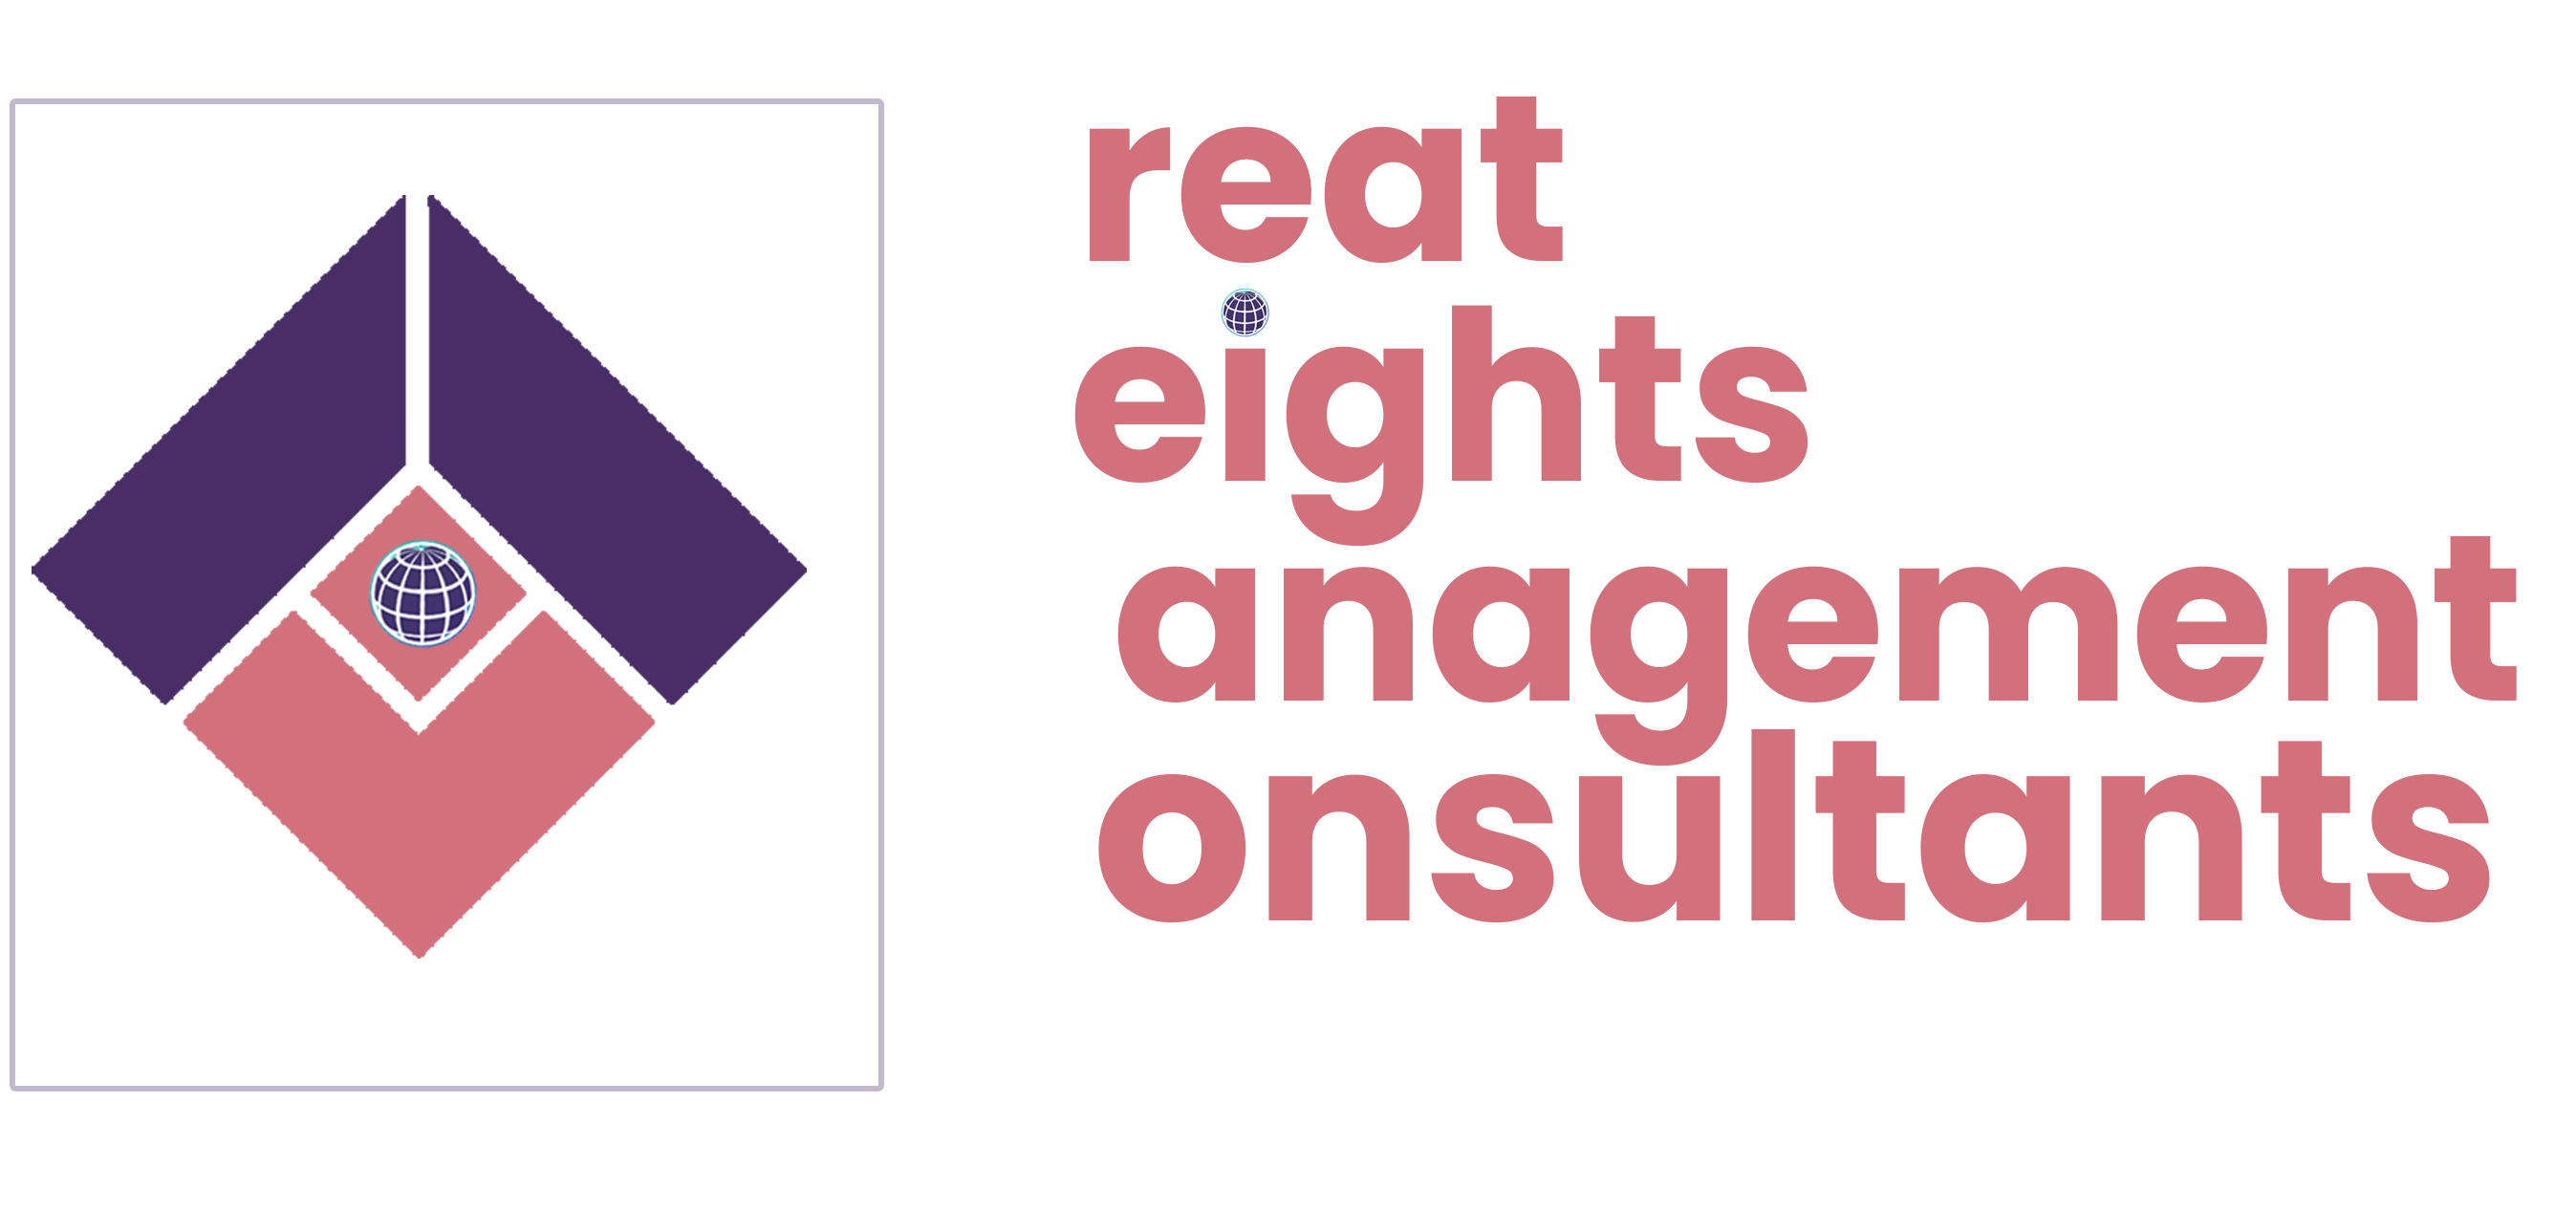 Great Heights Management Consultants Ltd